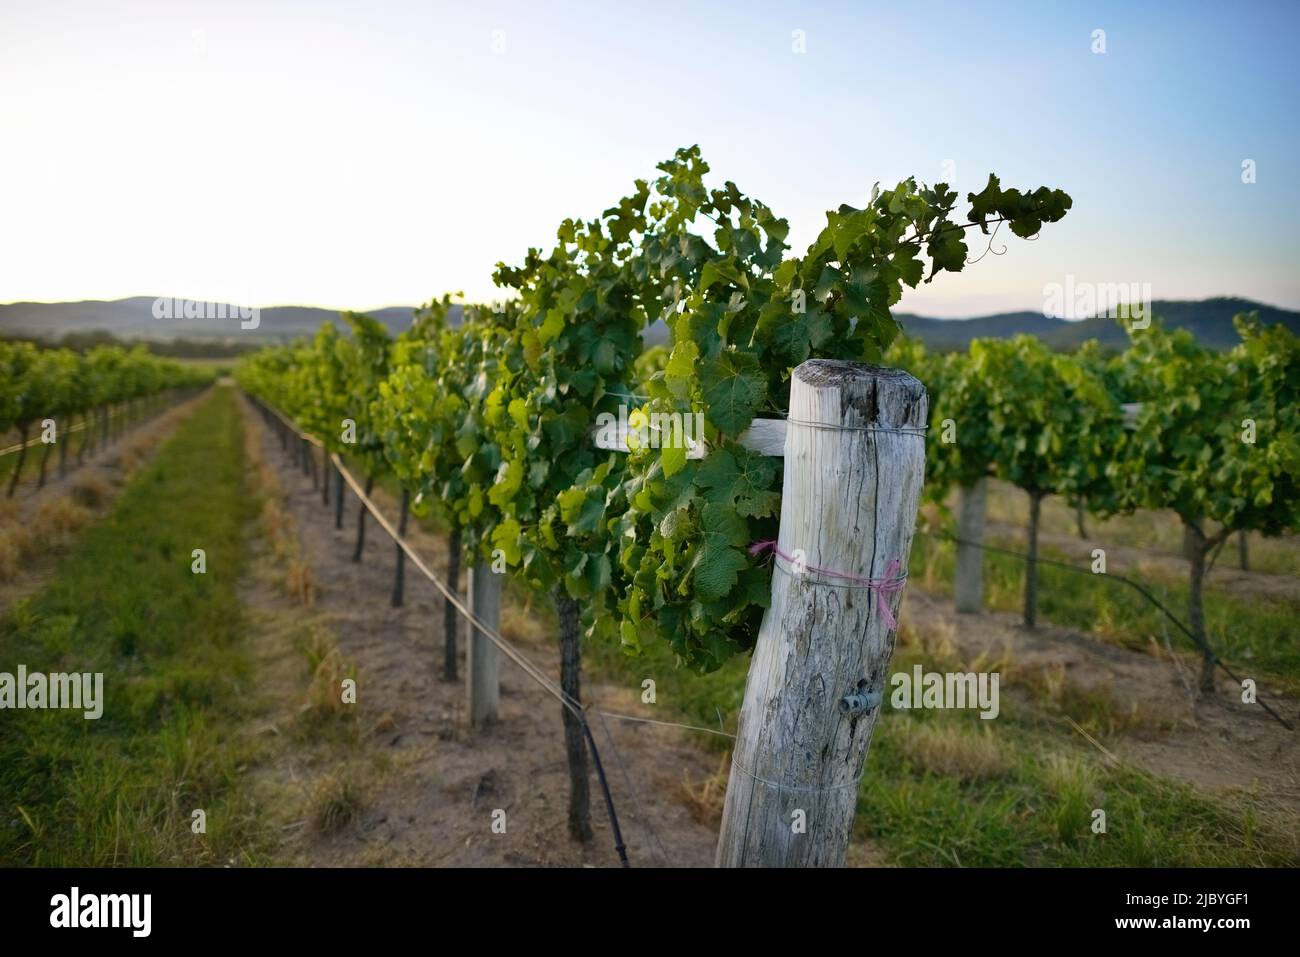 Rows of grapevines laden with grapes in Vineyard and afternoon light Stock Photo